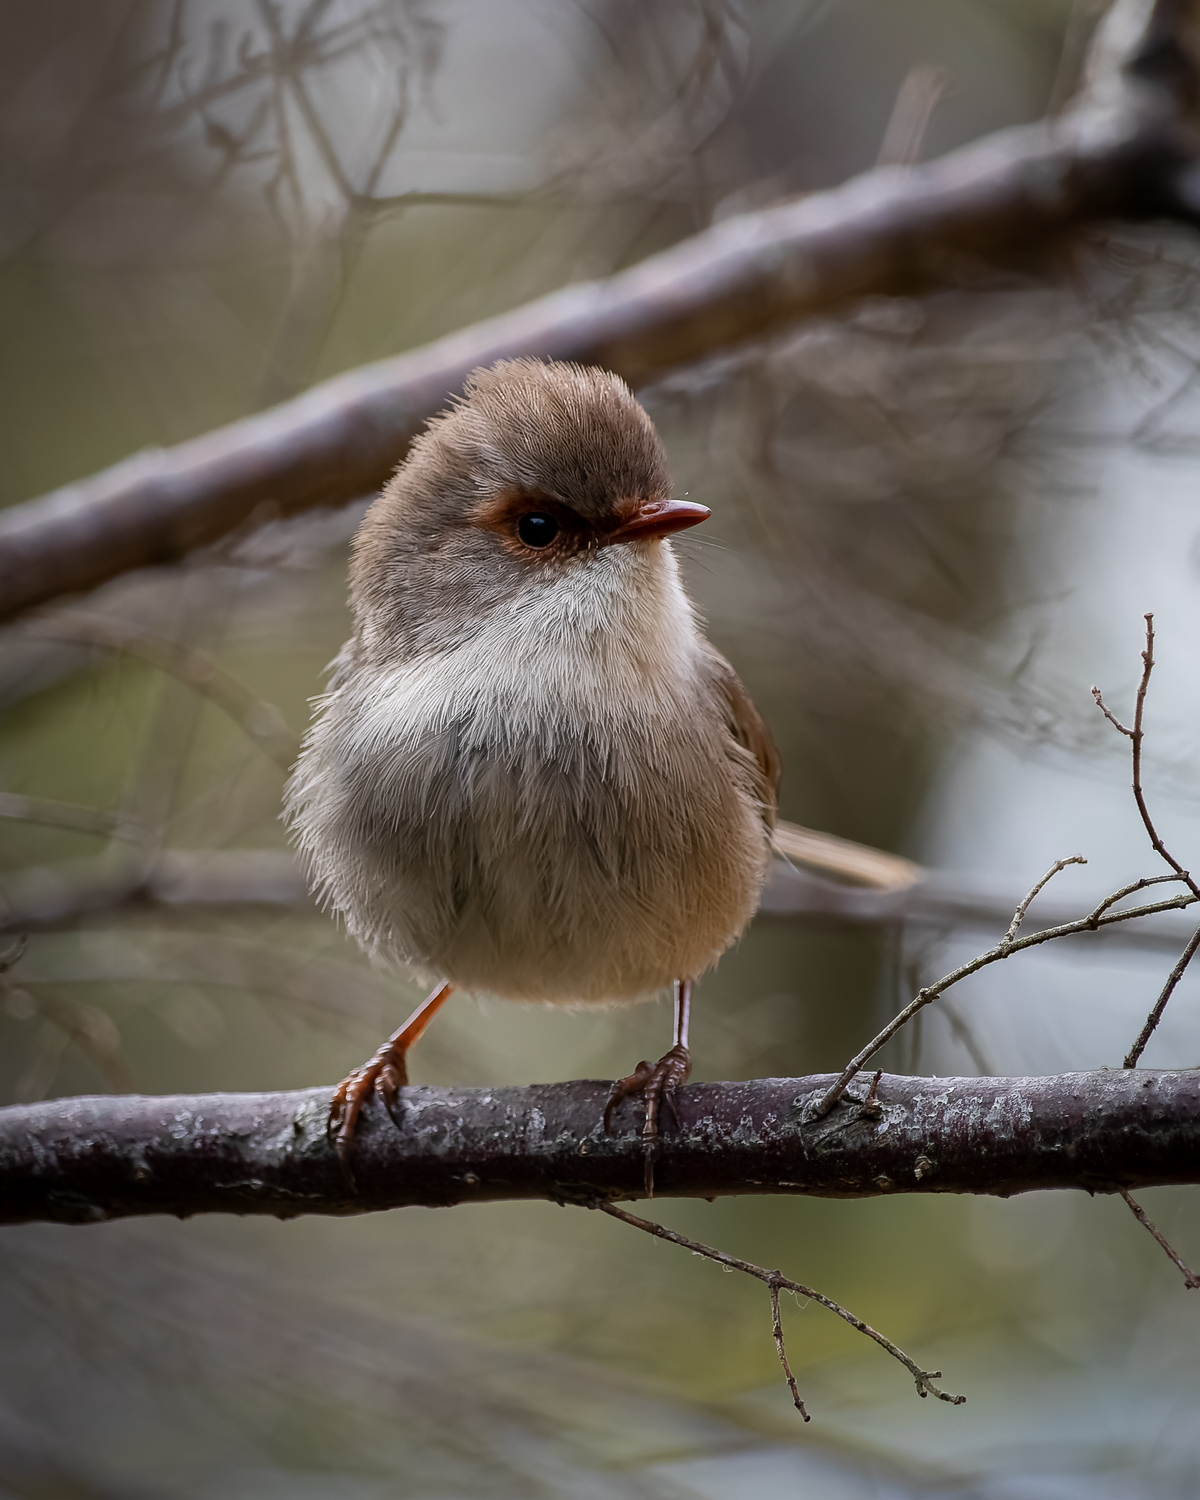 A small brown bird with an orange beak on a small tree branch